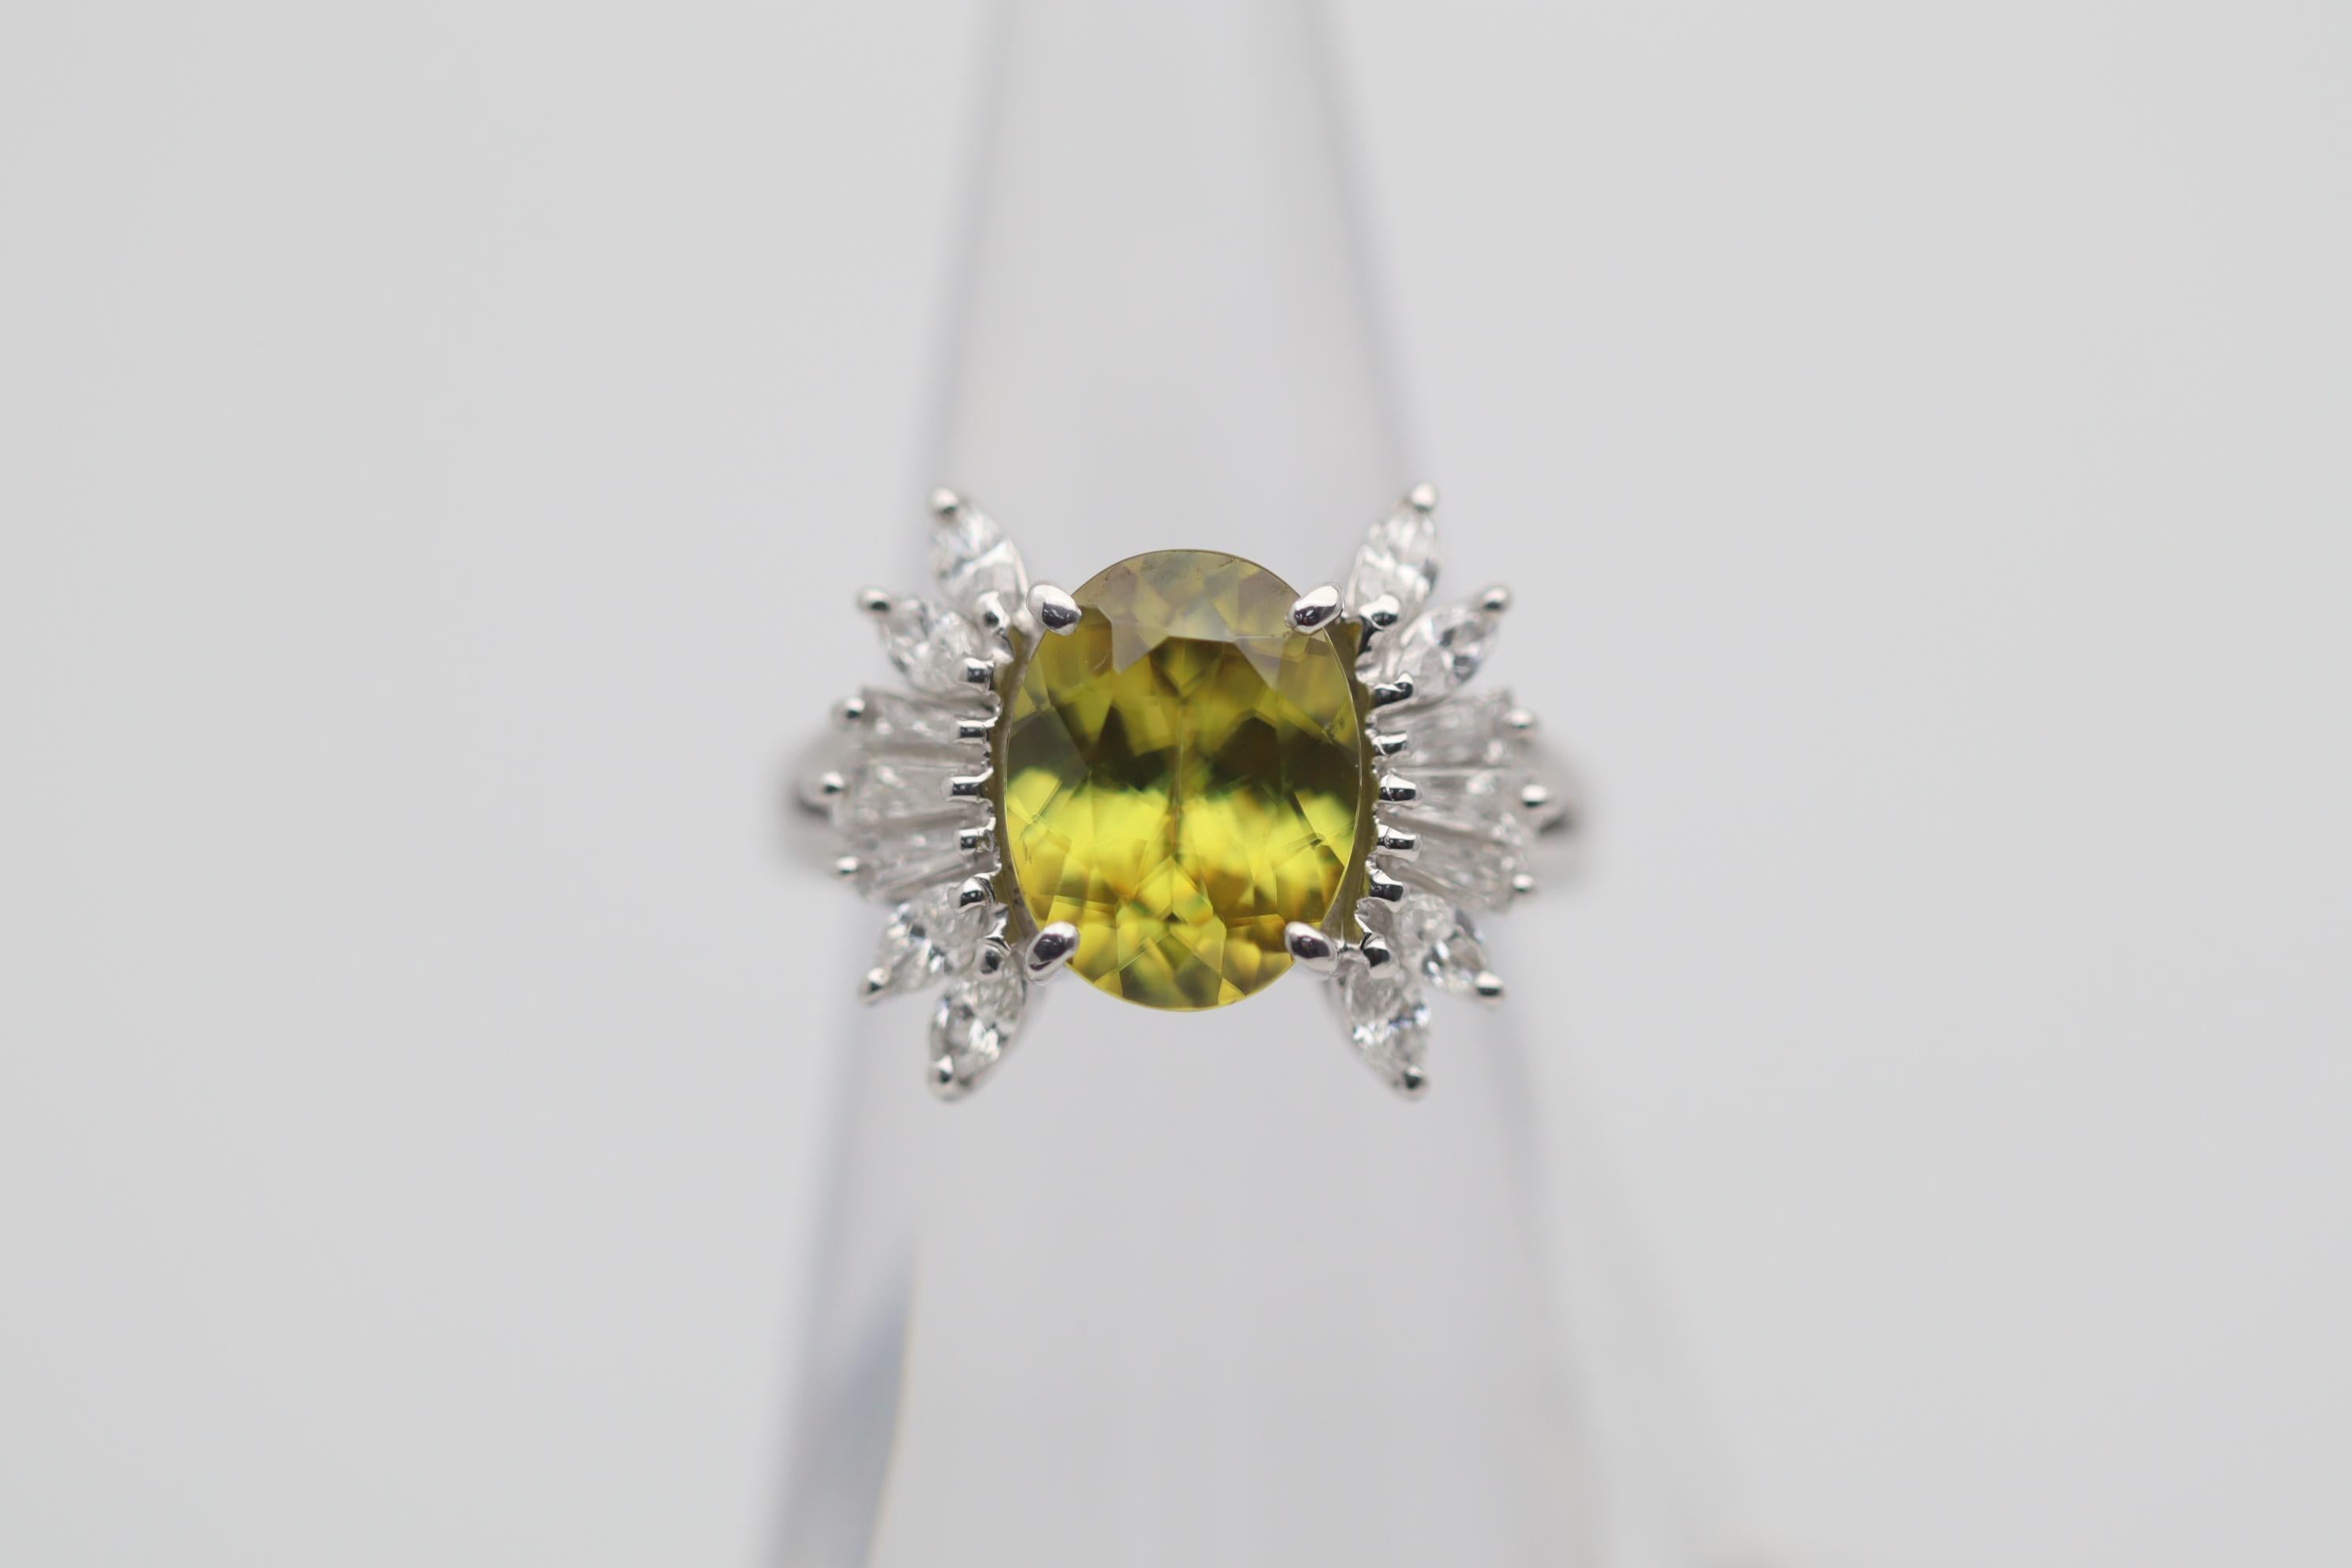 A lovely ring featuring a fine and unique gem, sphene! Sphene has a very high refractive index which gives the stone extremely high brilliance and fire. Various colors, including red, orange, green and yellow, can be seen scintillating across the